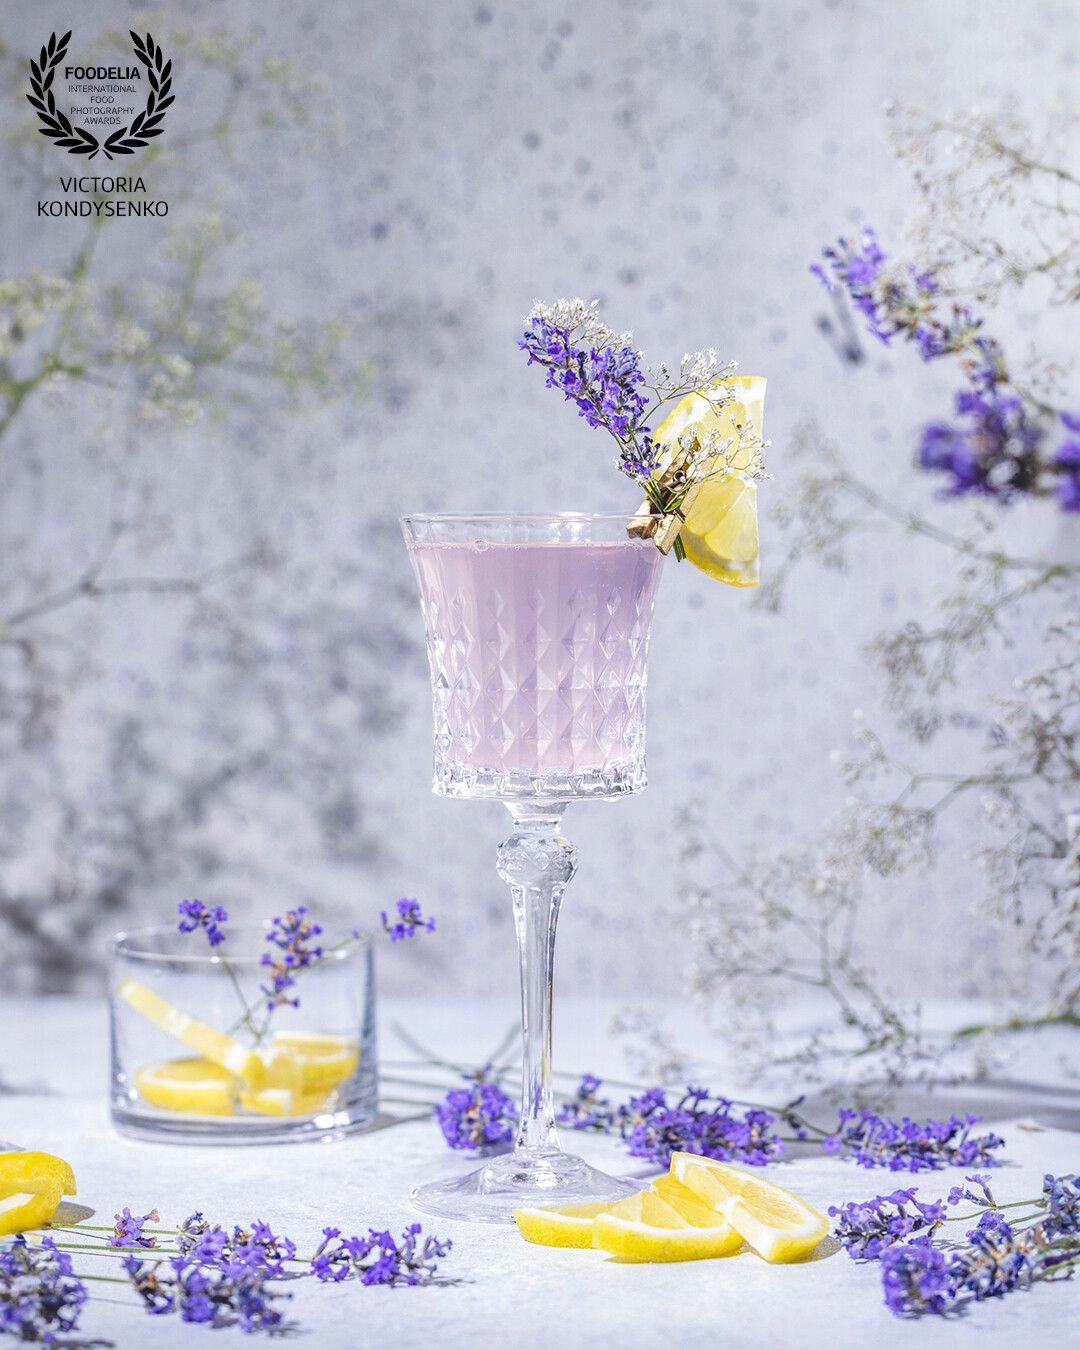 Sparkling Lavender Cocktail with prosecco. Promotional photo shoot of the local Ukrainian family cafe.